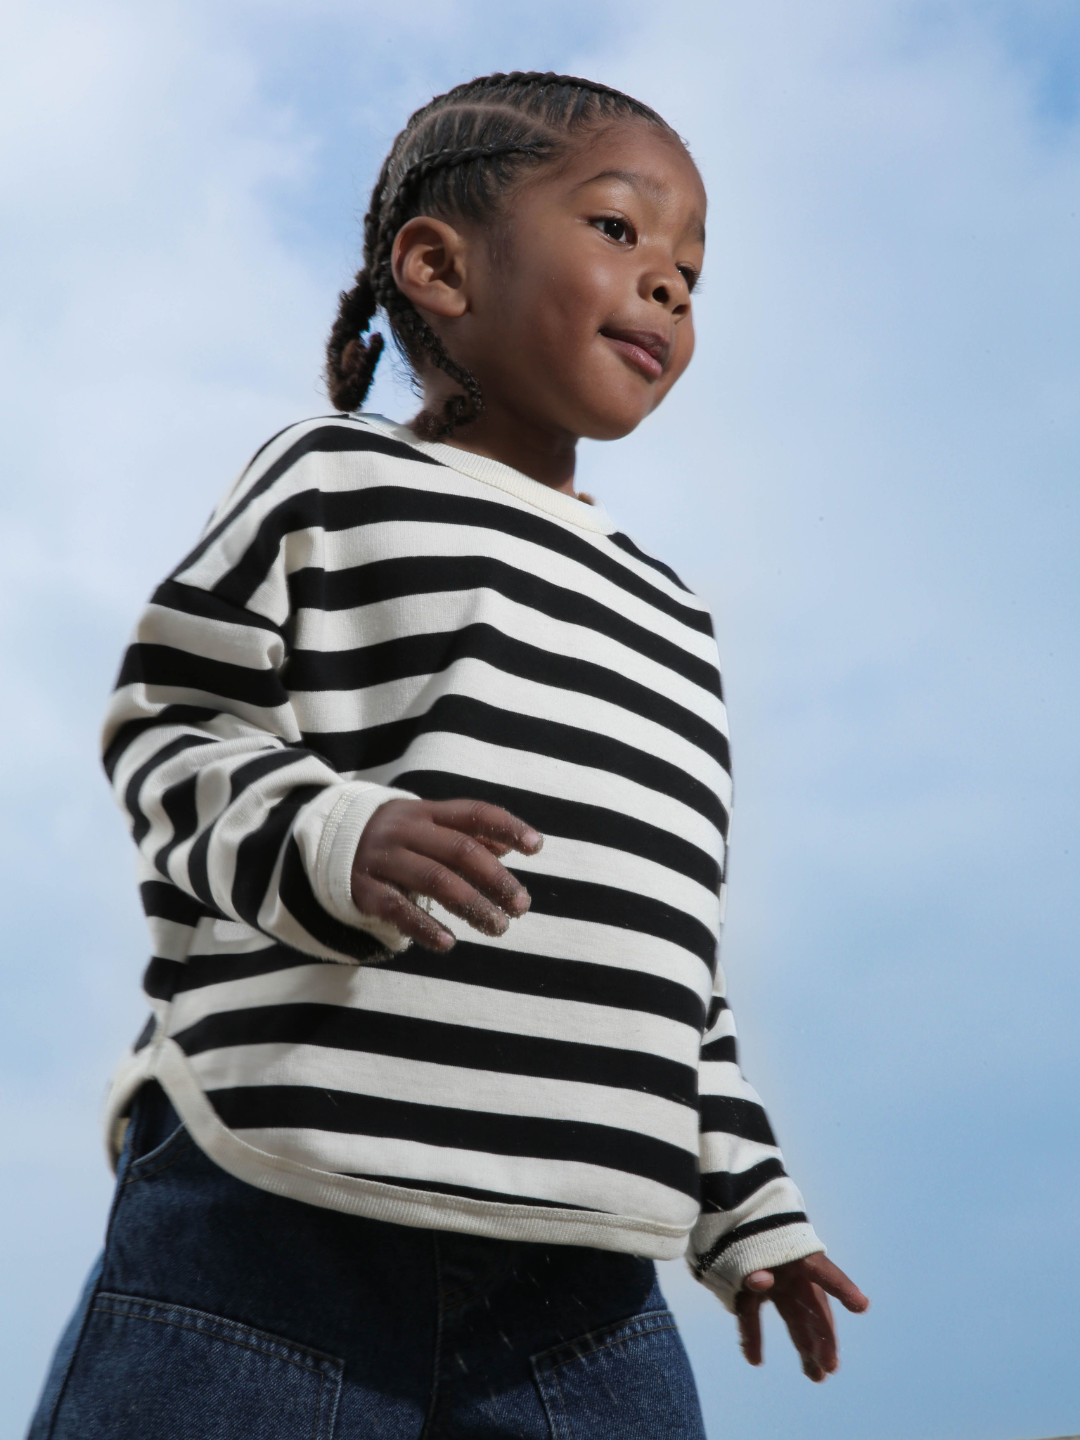 Child wearing the perfect stripey longsleeve tee with black and cream horizontal stripes. He wears blue jeans and his hair in braids, and is standing against blue sky.